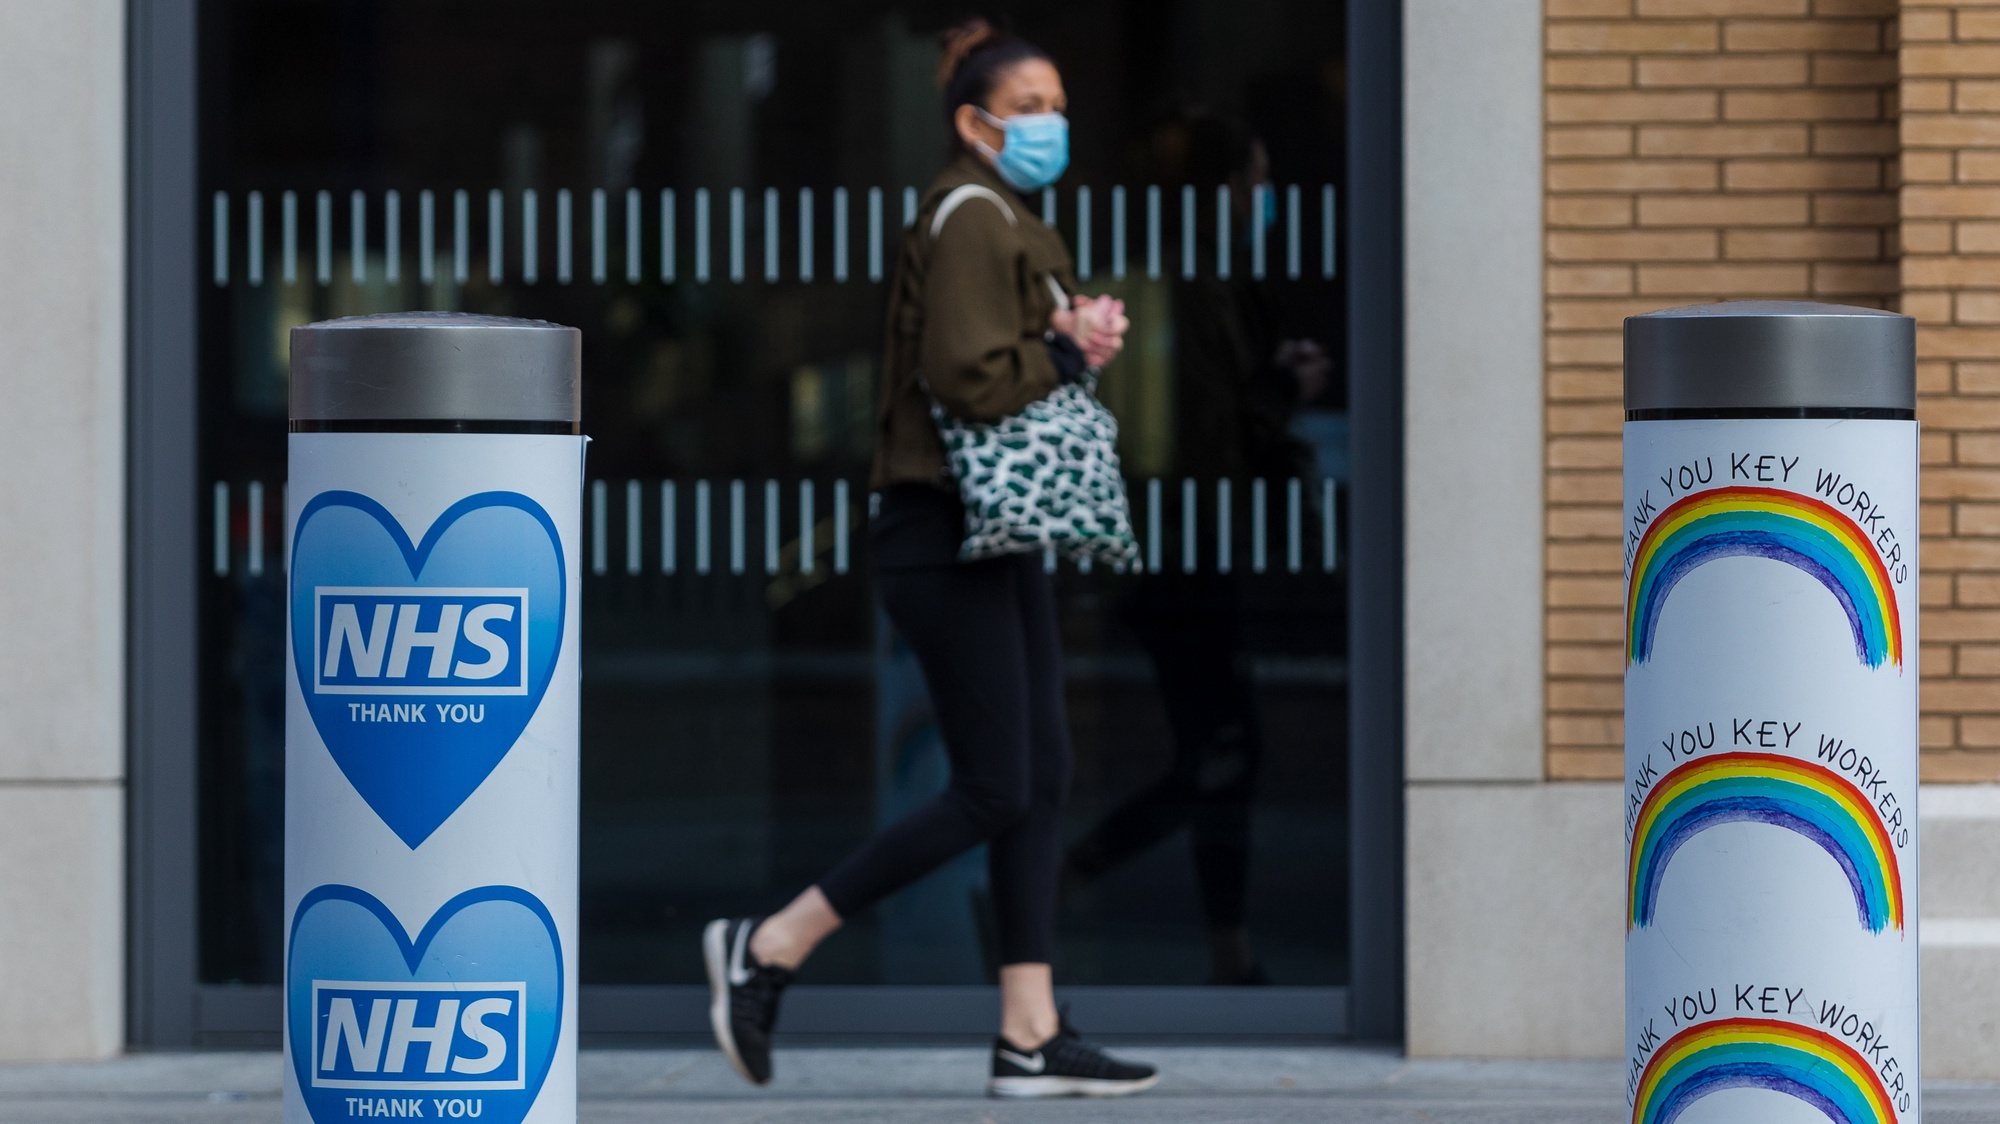 epa08870398 A woman wearing a face mask walks past an NHS bollard near Guy&#039;s Hospital in London, Britain, 08 December 2020. Margaret Keenan, 90, became the first person in the UK to receive the Pfizer-BioNTech Covid-19 vaccine on 08 December and NHS hospitals across Britain will now start to roll out the Pfizer BioNTech Covid-19 vaccine.  EPA/VICKIE FLORES